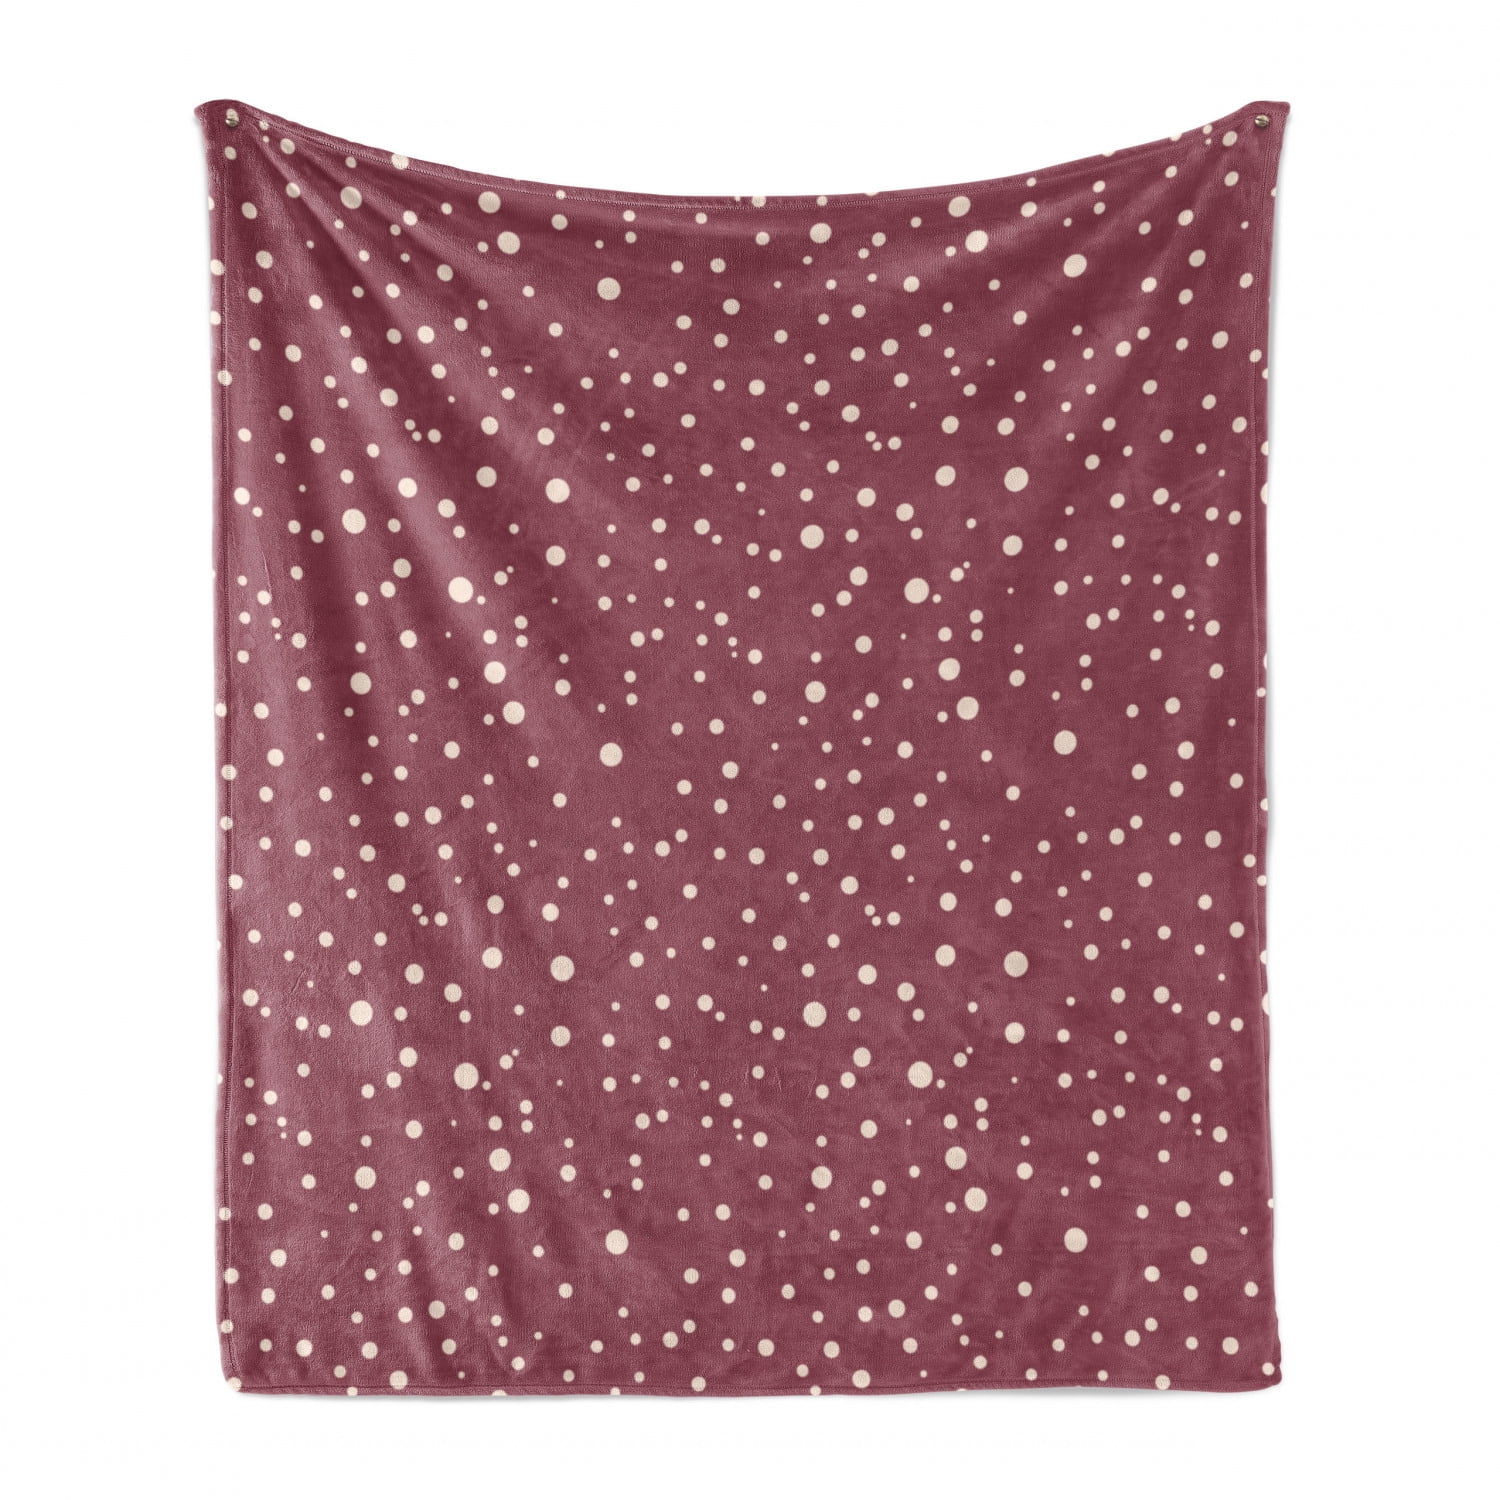 Simplistic Style Randomly Arranged Dots Circles Illustration Pattern 60 x 80 Ambesonne Abstract Throw Blanket Flannel Fleece Accent Piece Soft Couch Cover for Adults Mauve Taupe Champagne